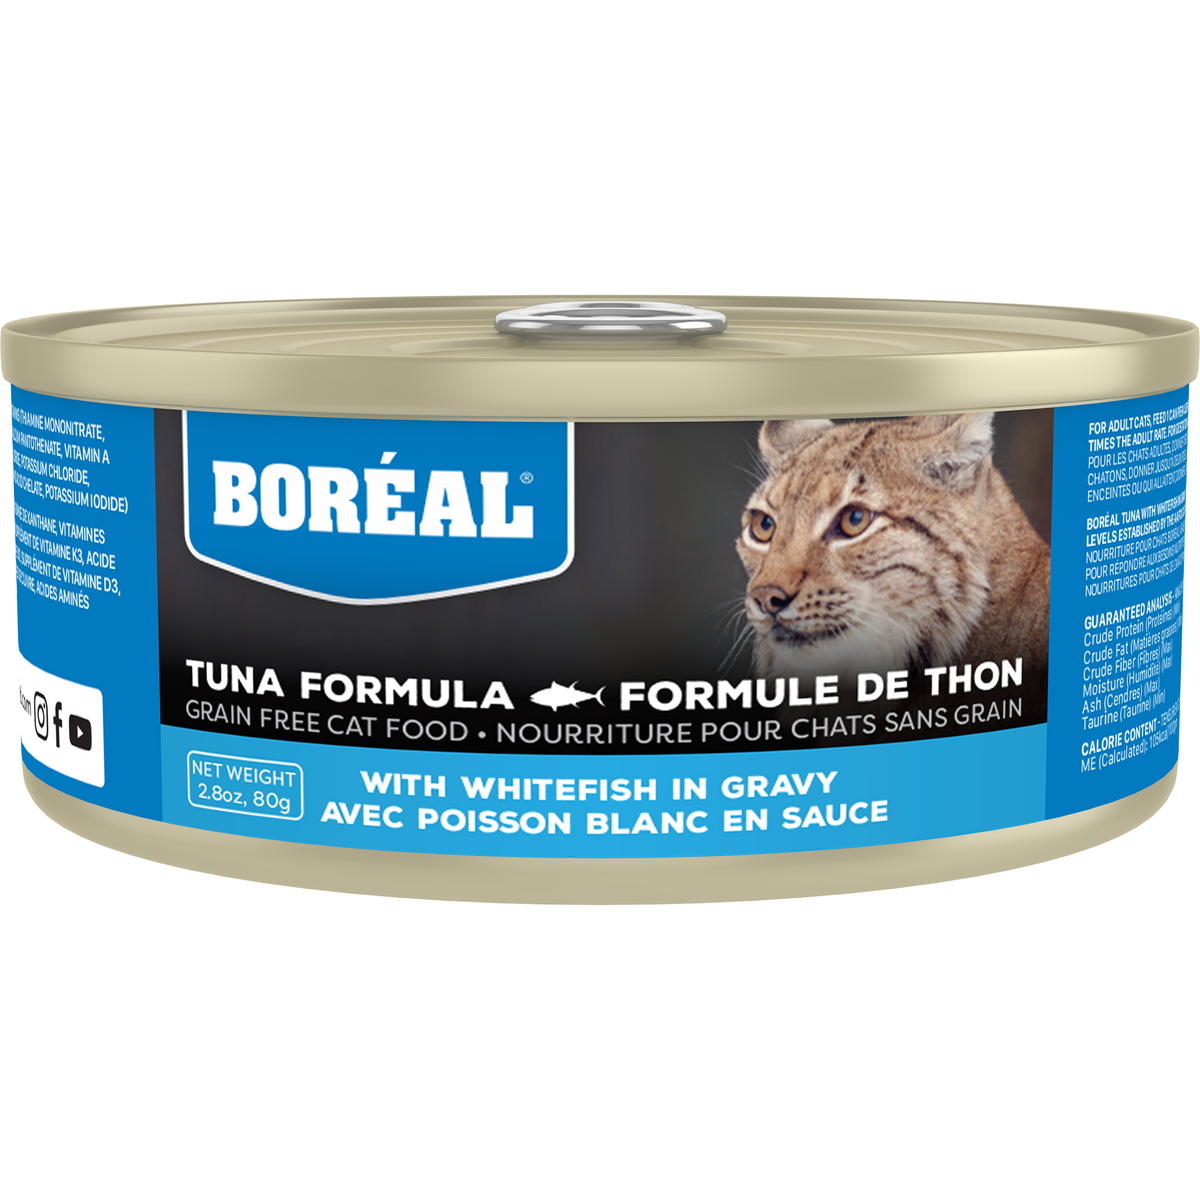 Boreal Tuna Formula - Red Tuna with Whitefish in Gravy - Canned Cat Food (80g)